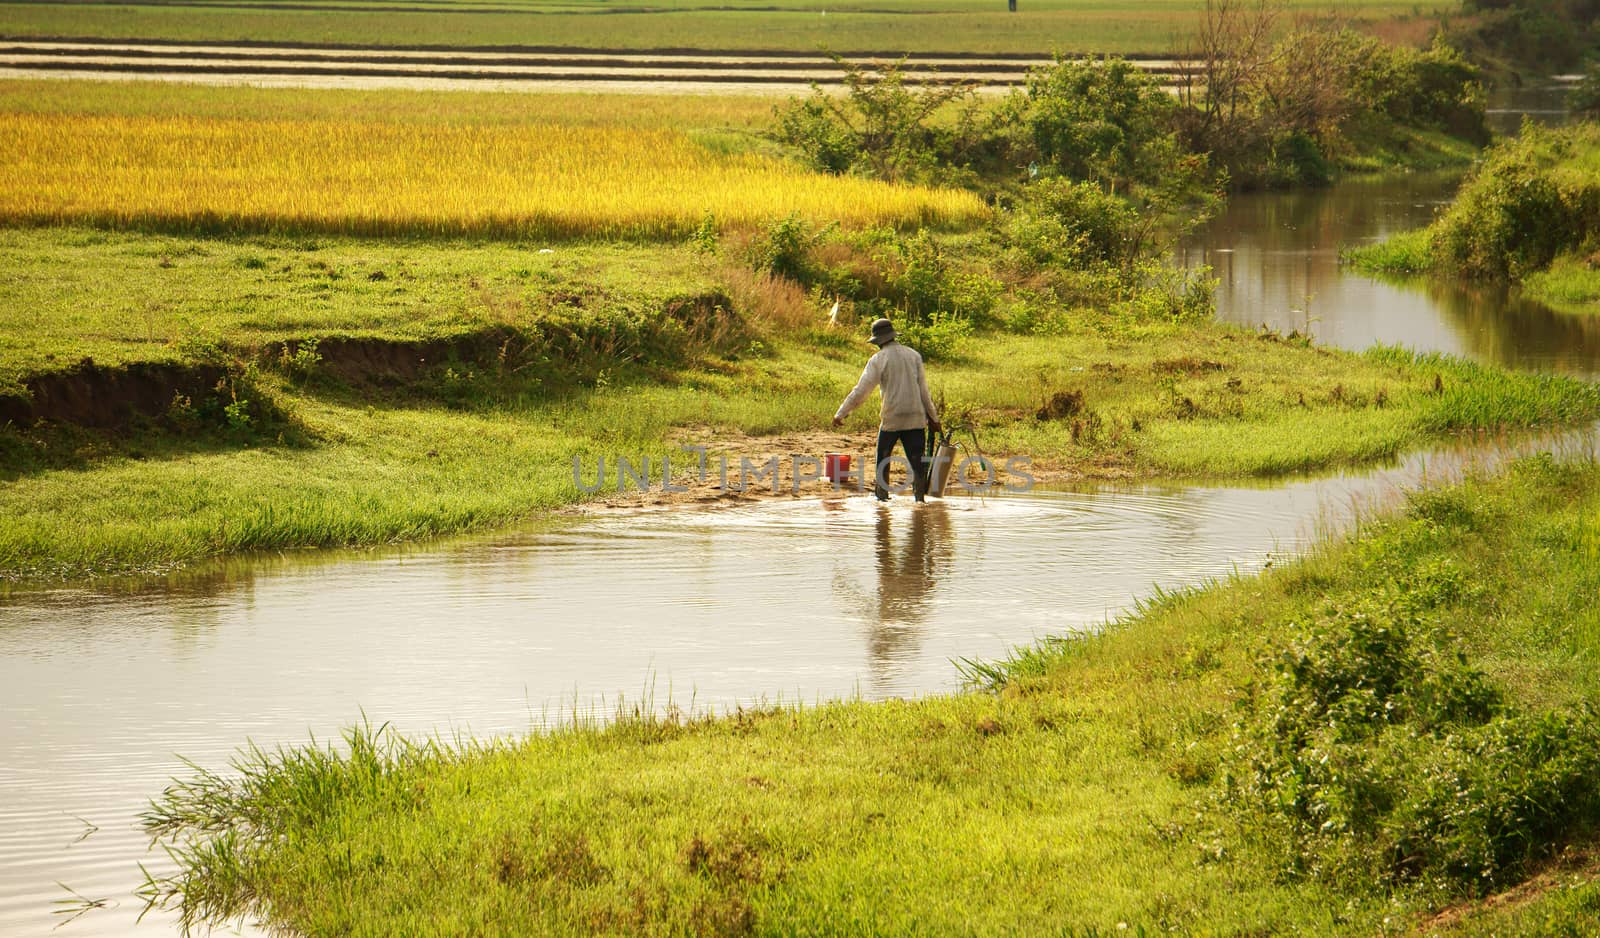  DAK LAK, VIET NAM- SEPTEMBER 5: Farner working on farmland, he take water into spayer from ditch in Daklak, Viet Nam, September 5, 2012     